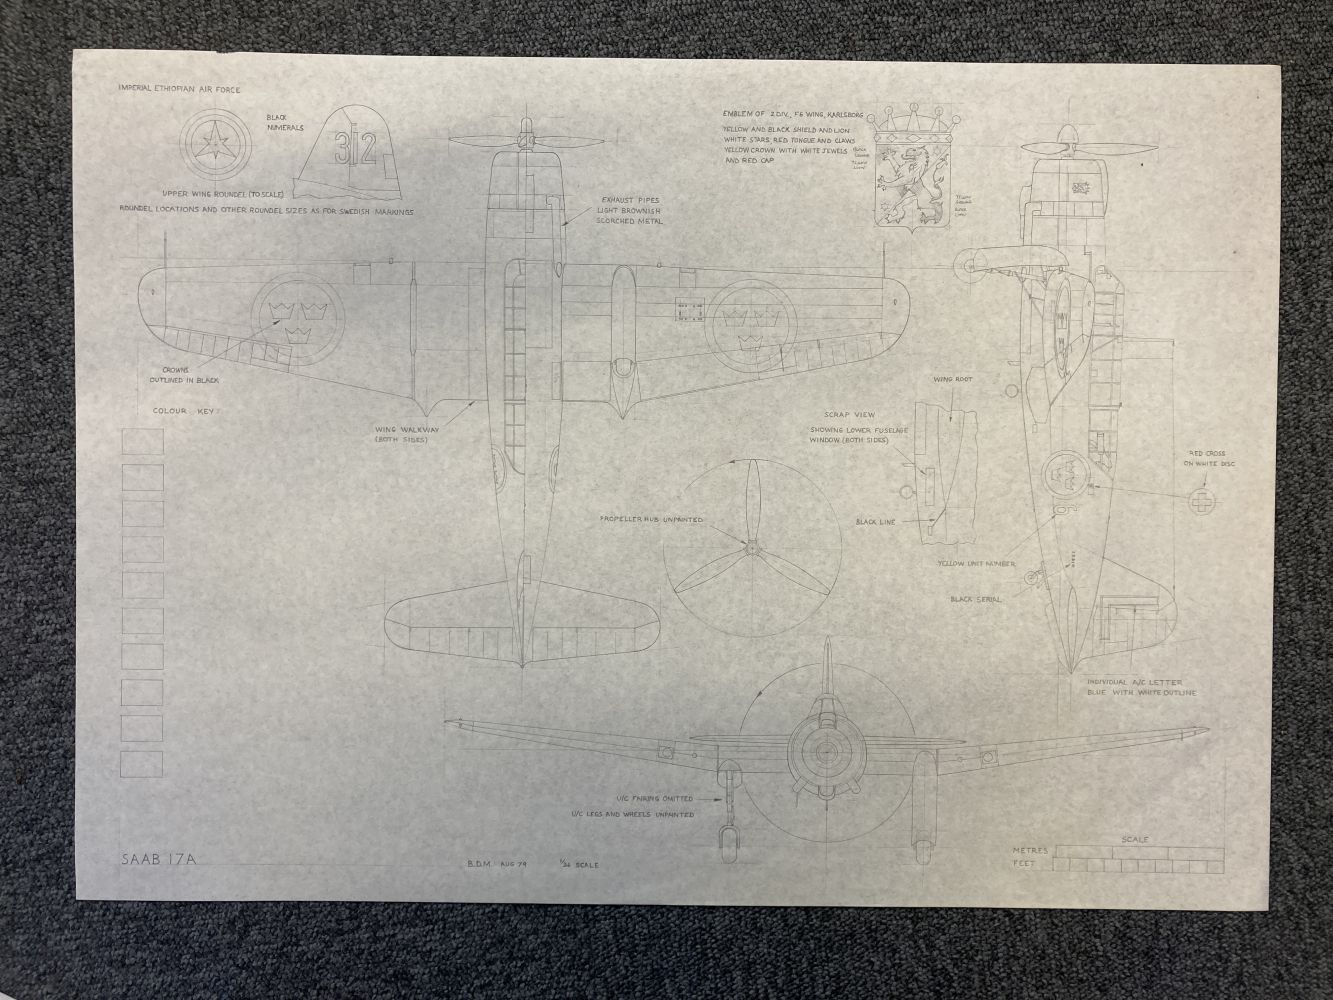 Aircraft Technical Diagrams. Technical drawings & printed diagrams of aircraft, late 20th c. - Image 2 of 3